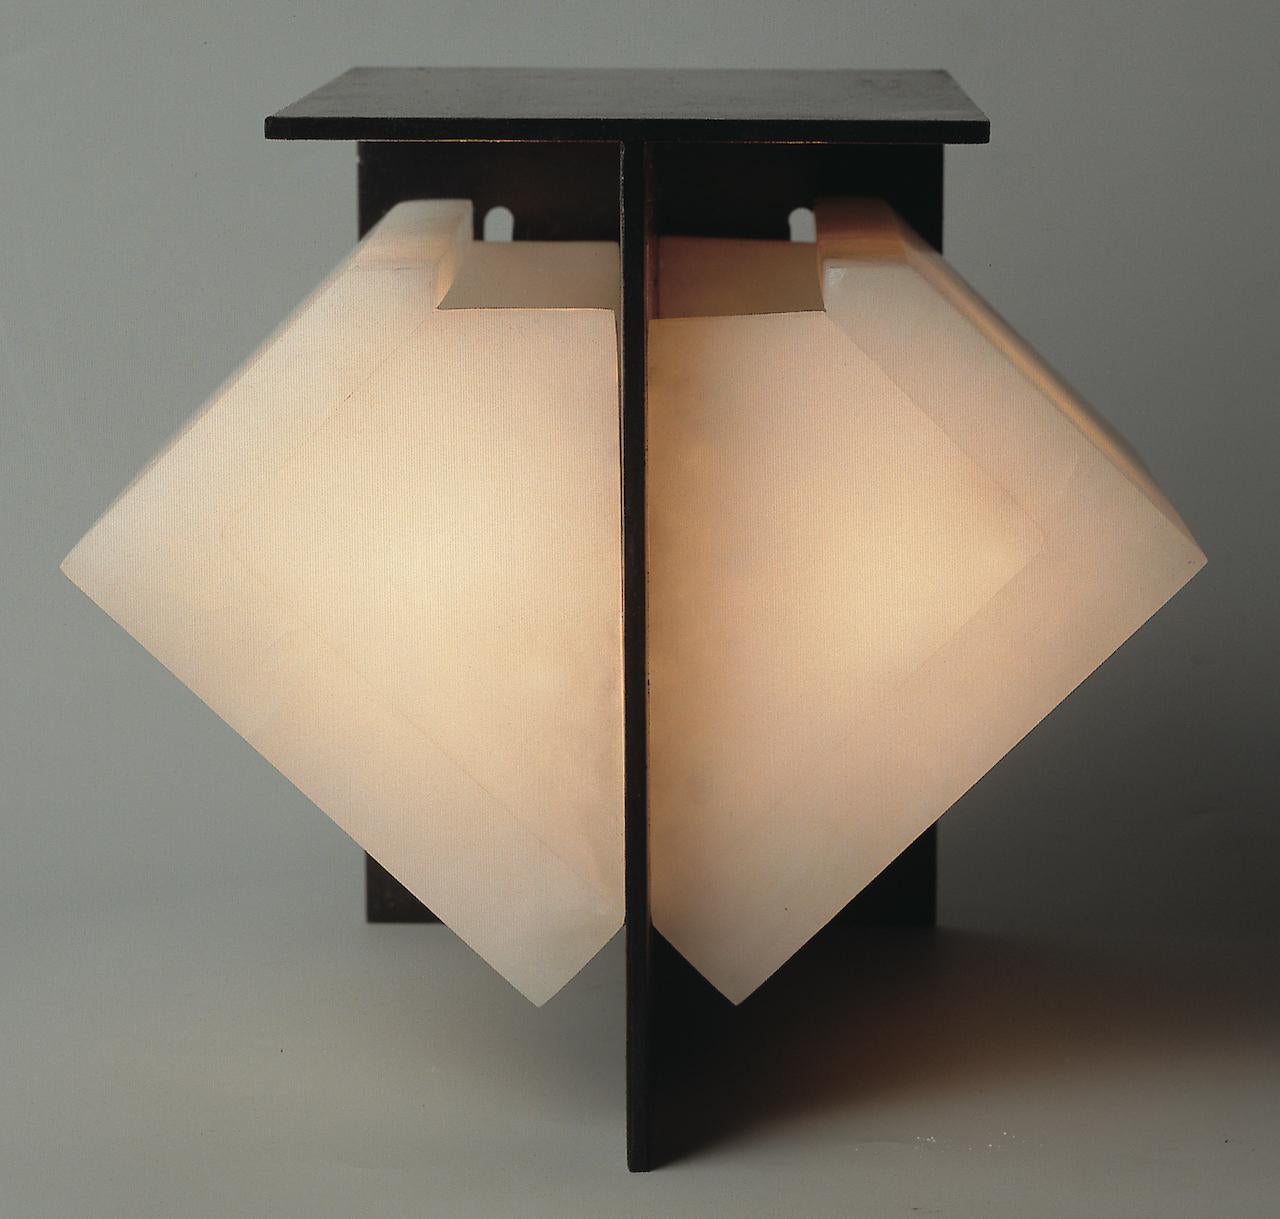 Designed in 1923, the rigorous geometry and single volume of this wall lamp reveal the mineral nature of alabaster and Pierre Chareau's minimalist choice, enhanced by the black metal / white alabaster contrast.